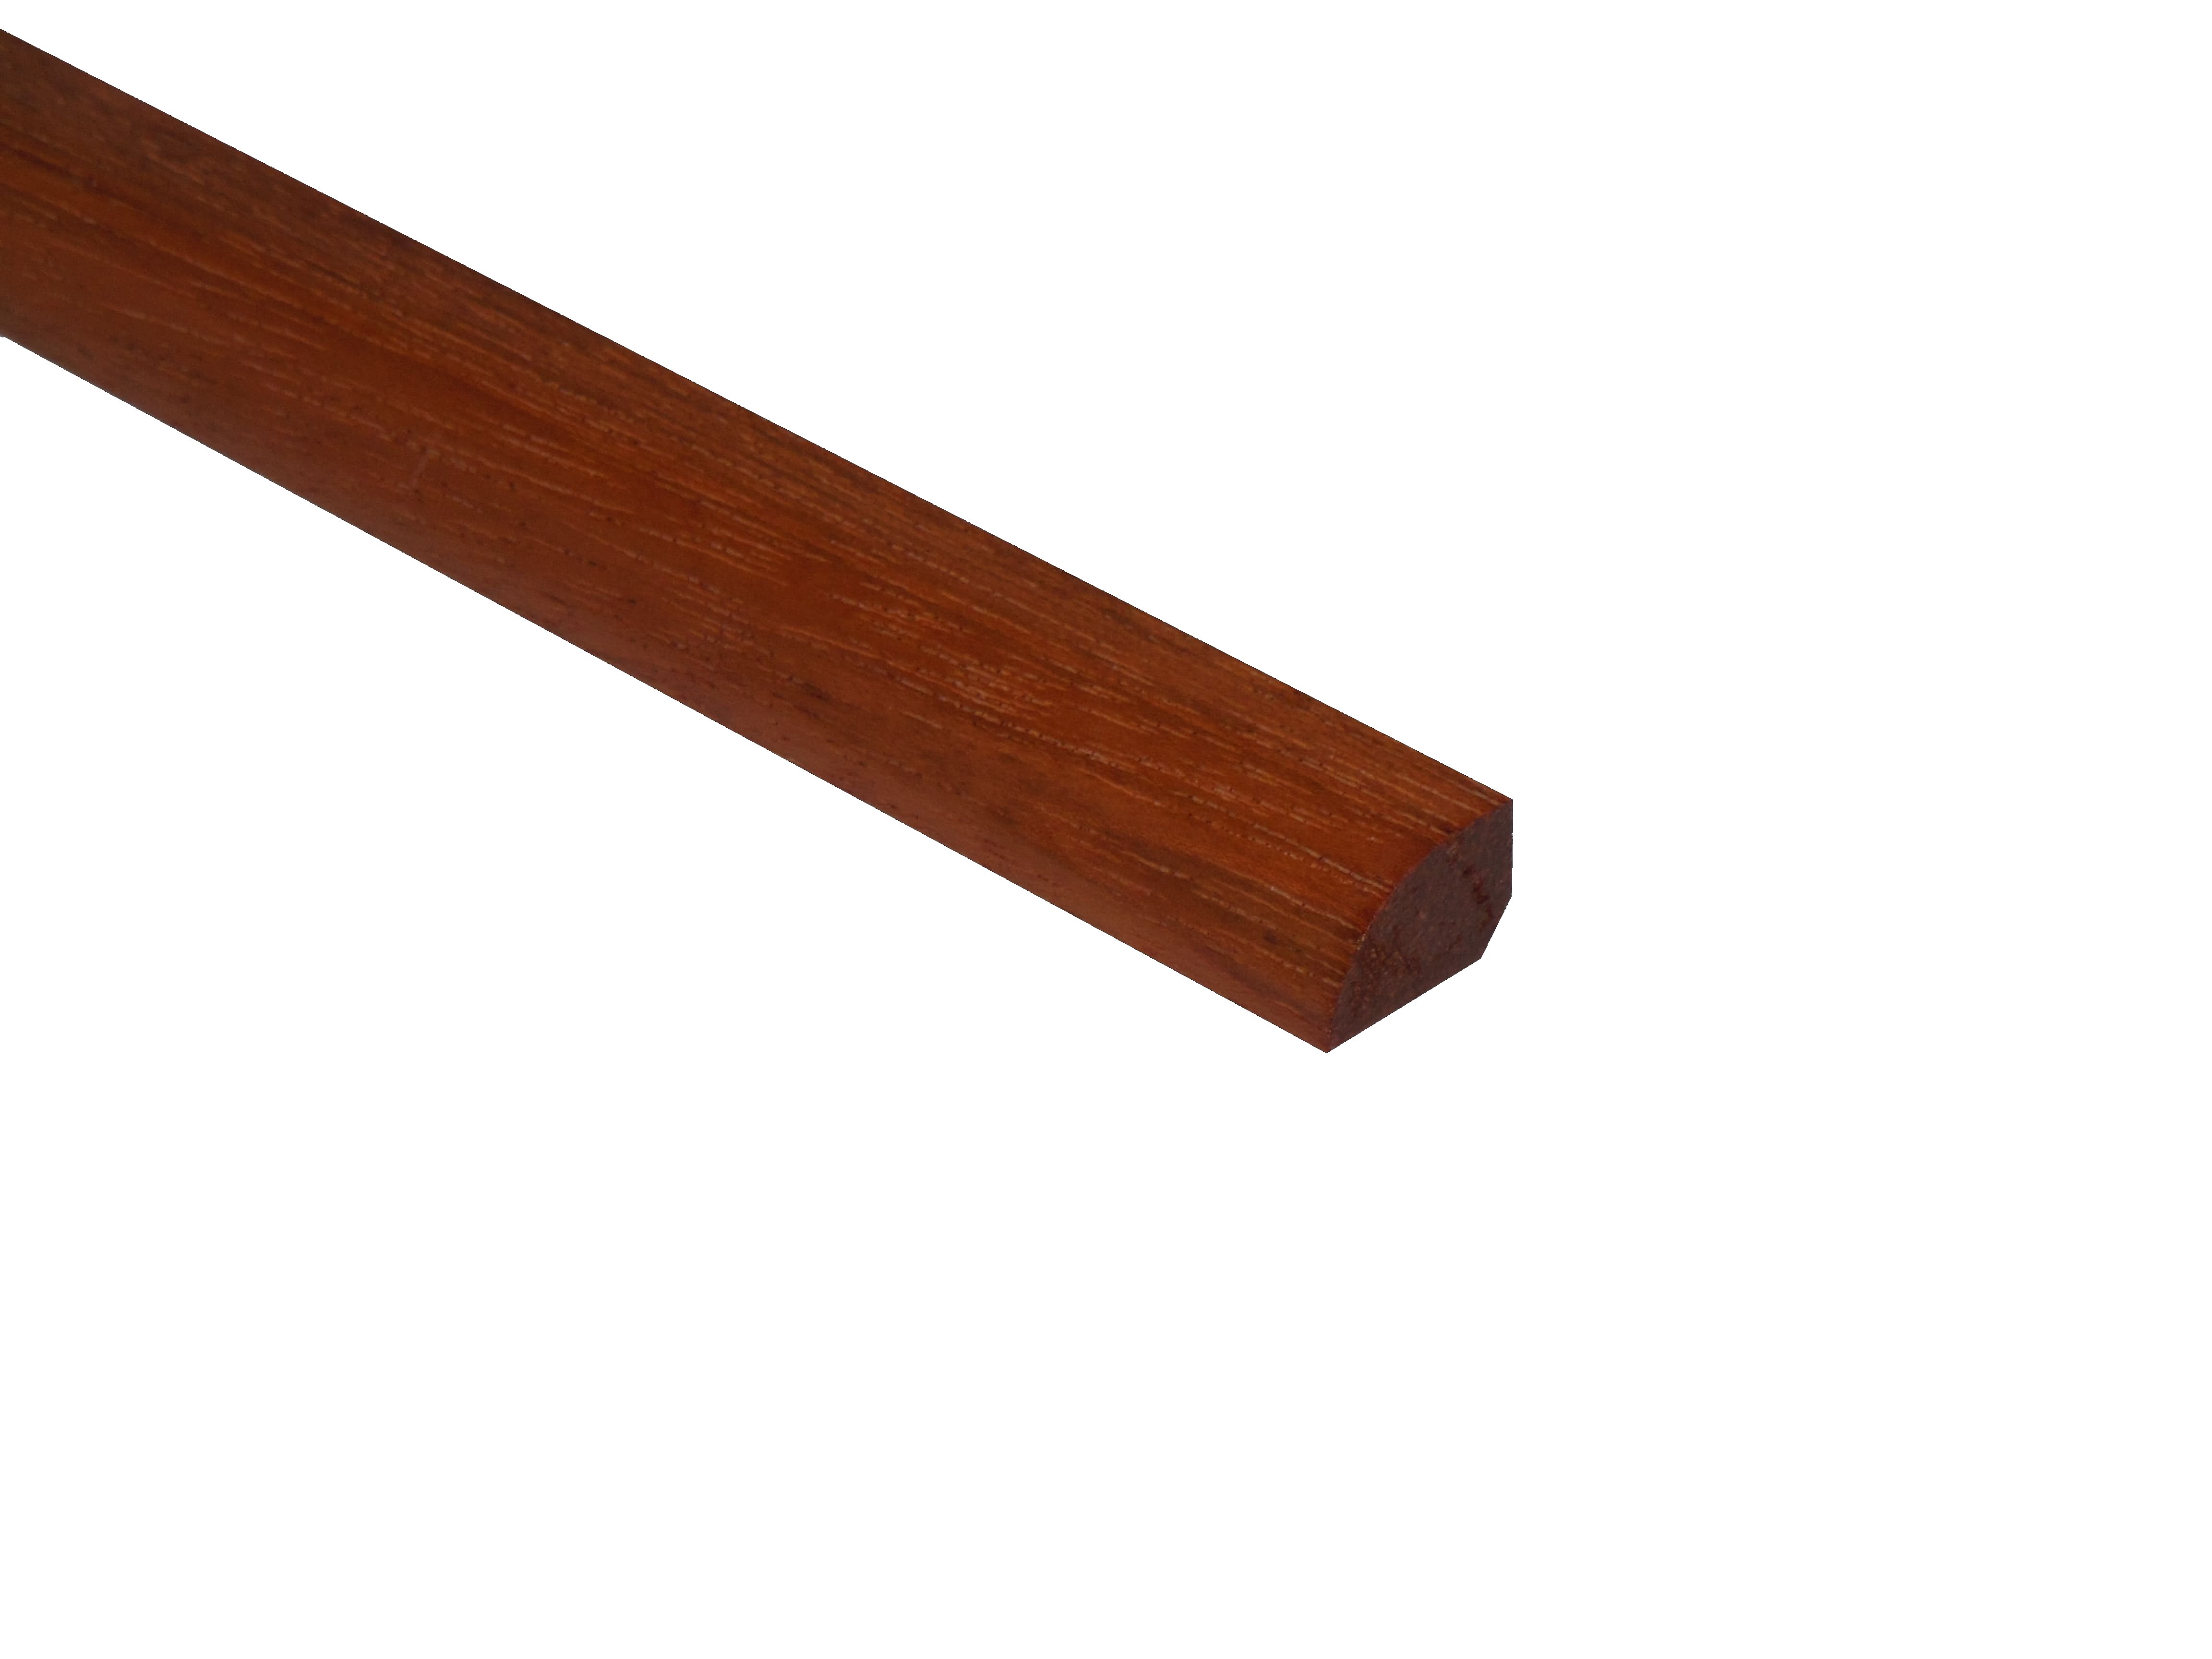 Prefinished Brazilian Cherry Hardwood 1/2 in thick x .75 in wide x 6.5 ft Shoe Molding